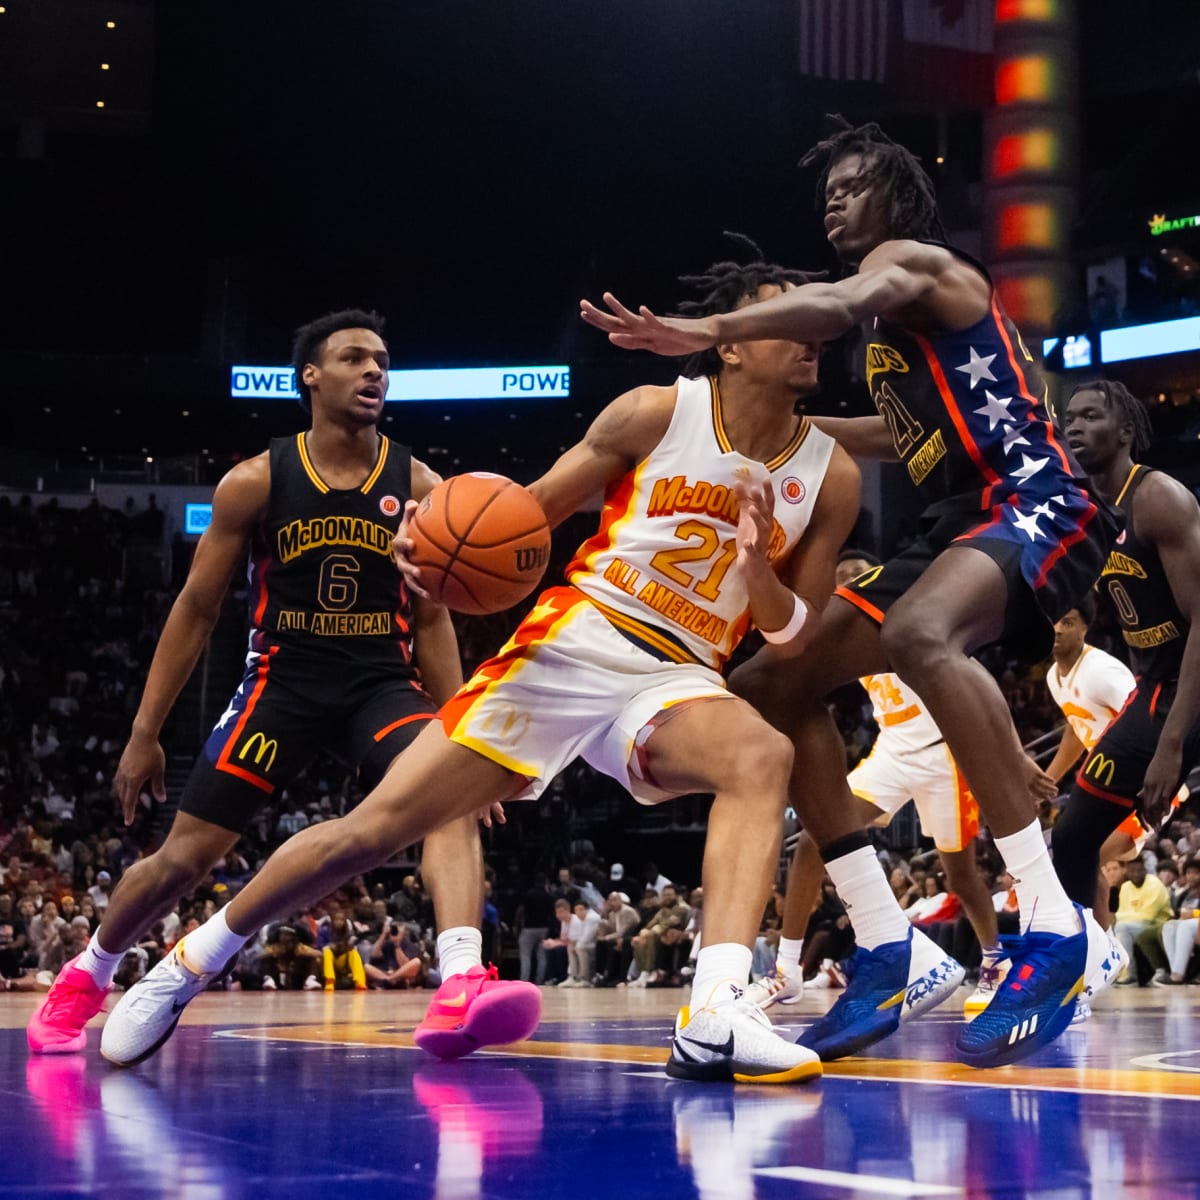 Iverson Classic All-American Game Free Live Stream Basketball - How to Watch and Stream Major League and College Sports